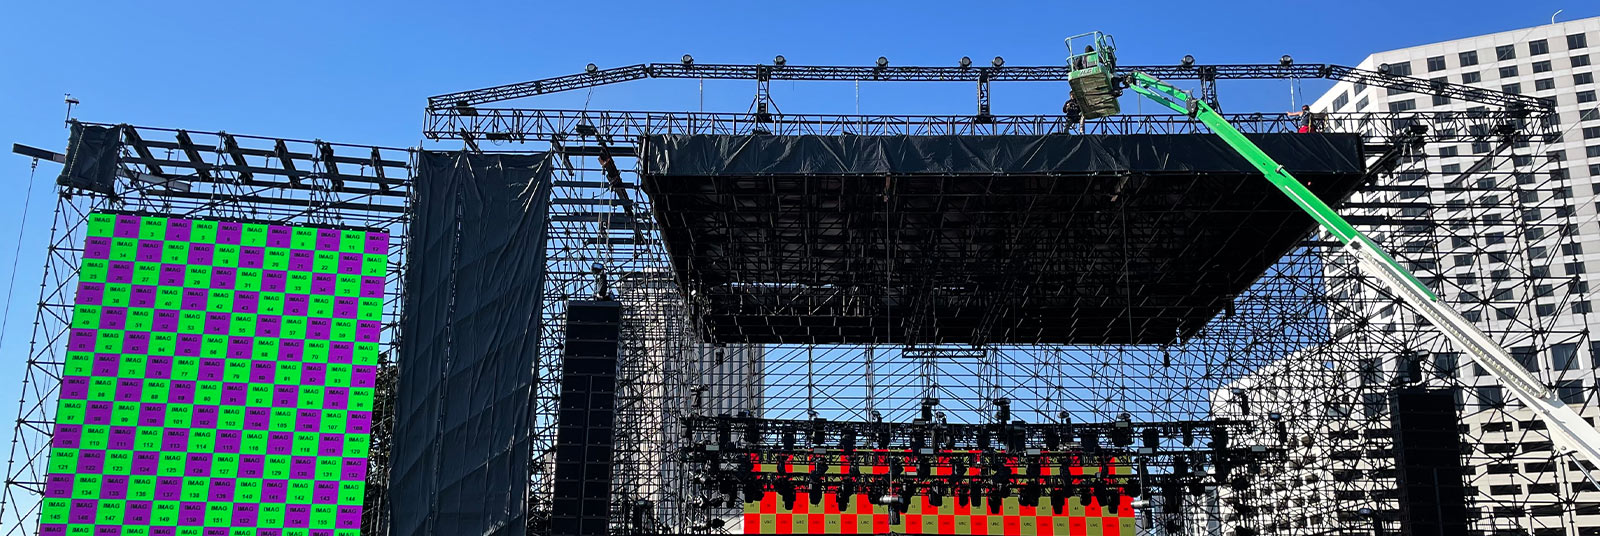 The temporary stage under construction for the 2022 March Madness Music Festival in New Orleans, Louisiana.